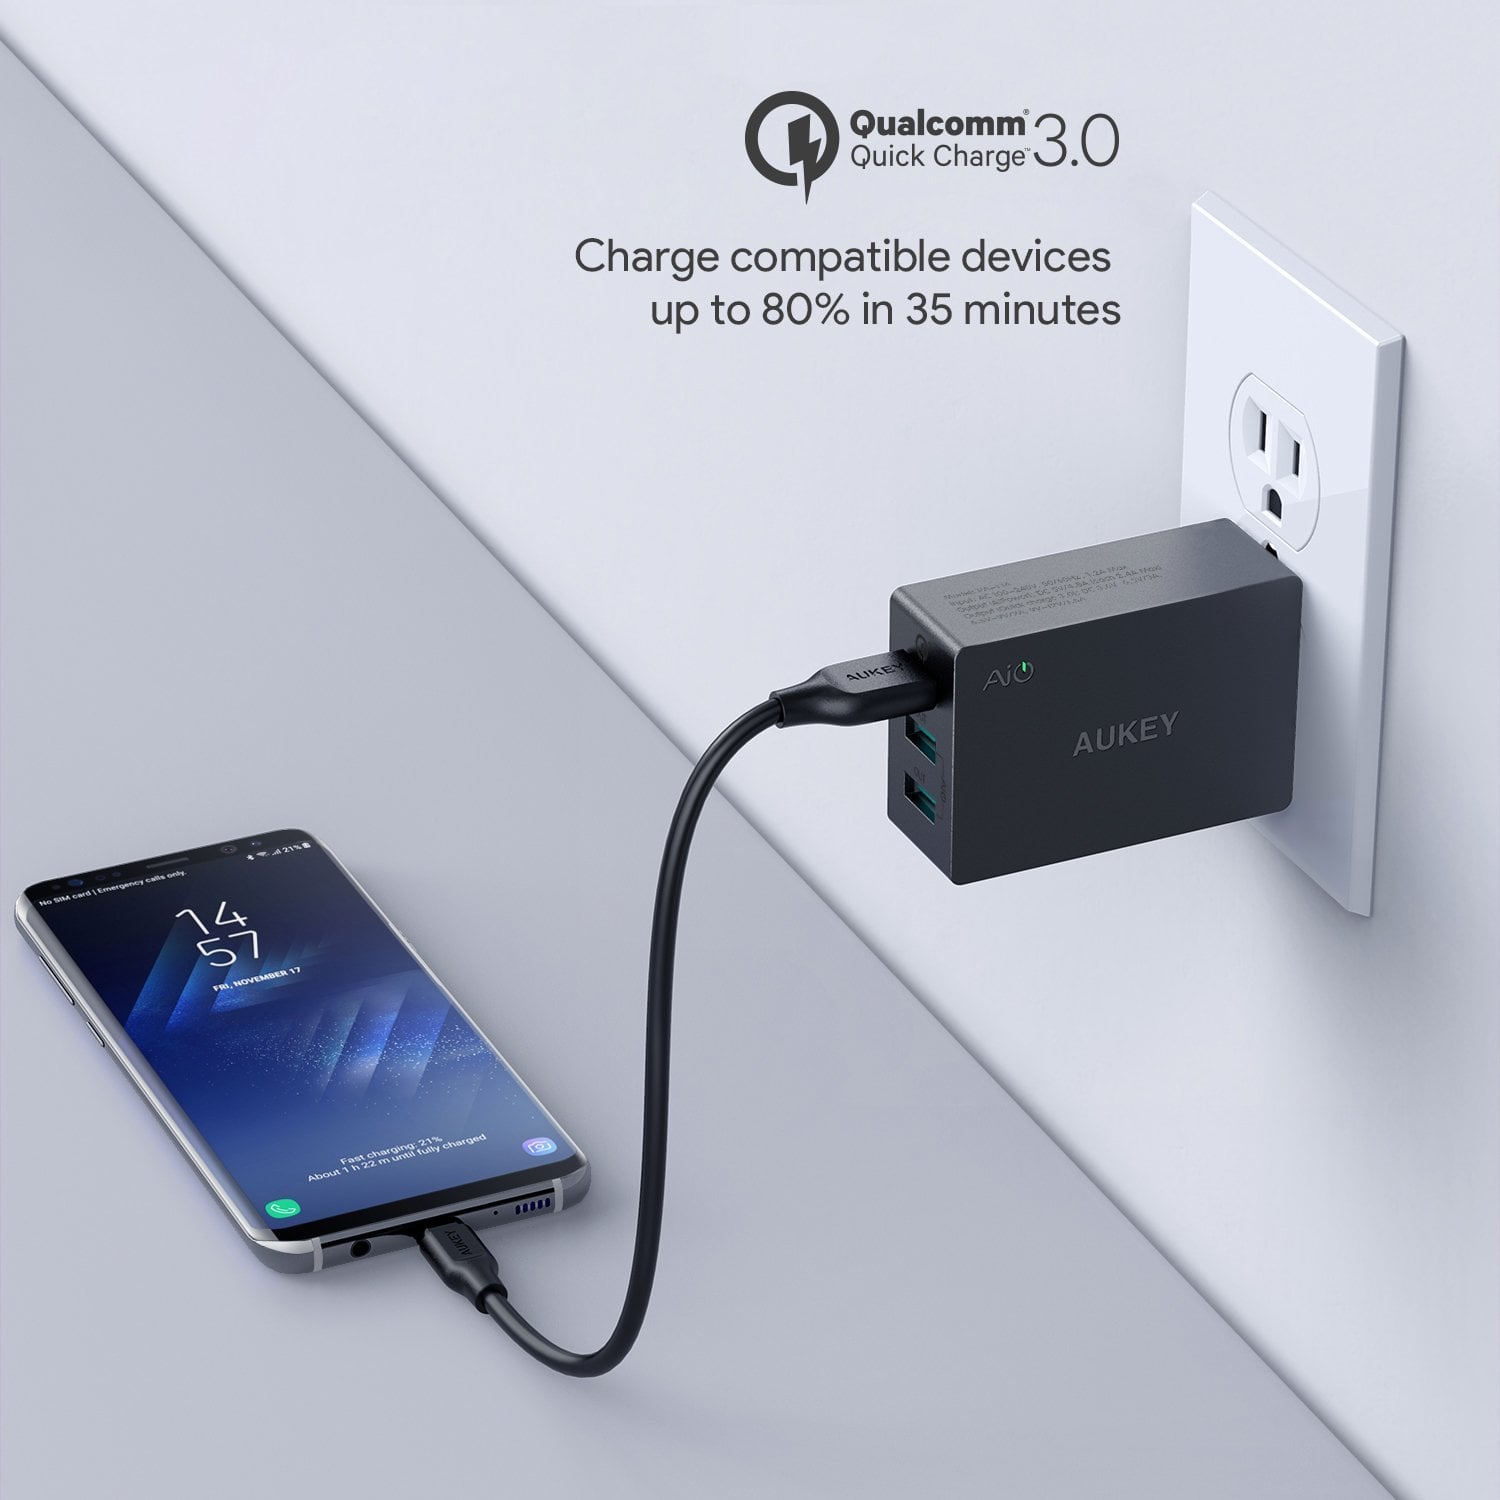 Charge compatible devices up to 80% in 35 minutes